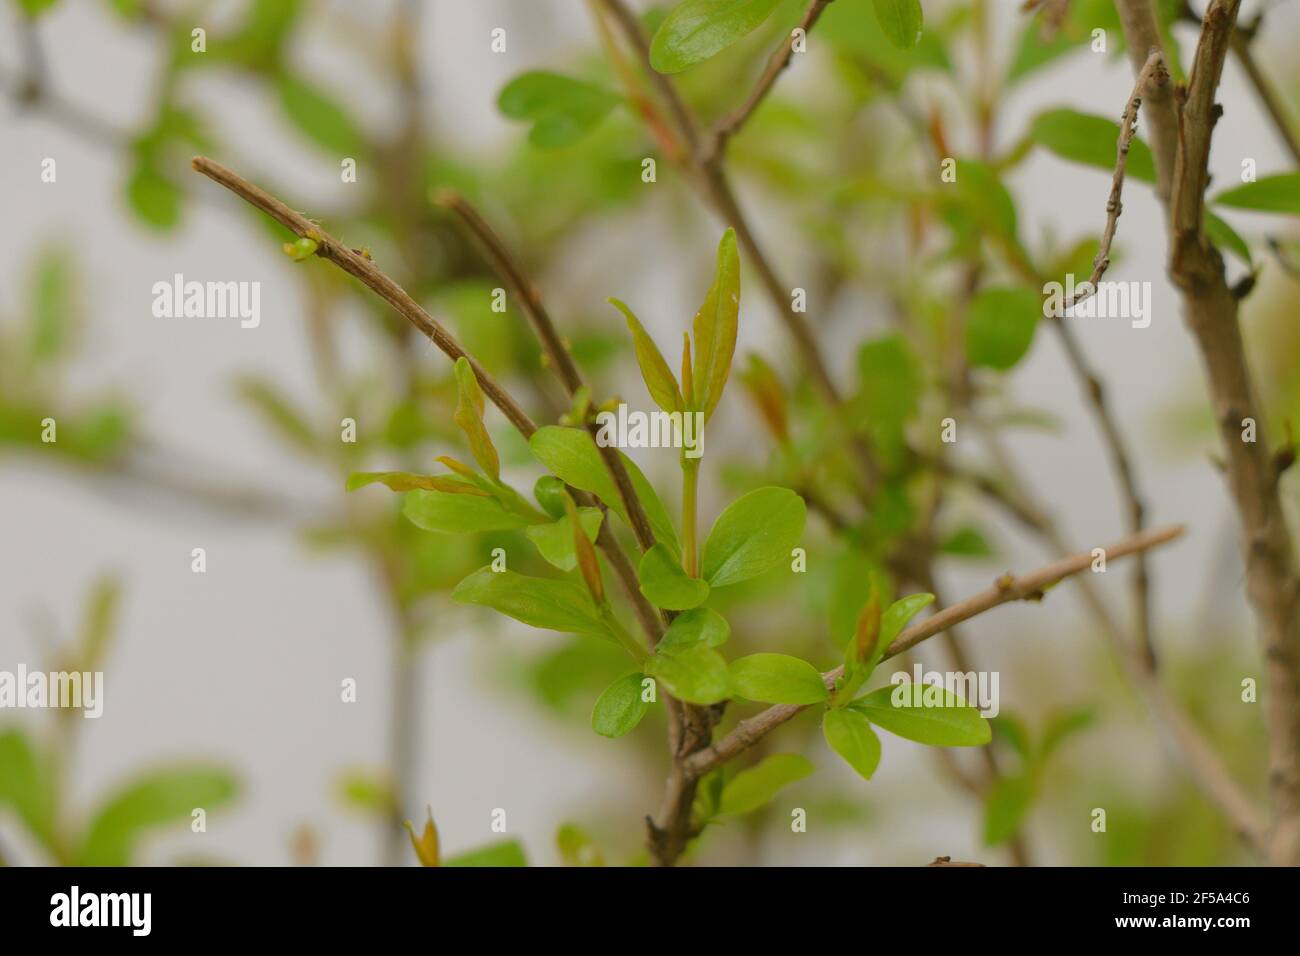 Fresh Green Pomegranate or Punica Granatum Leaves on Tree Branch Stock Photo